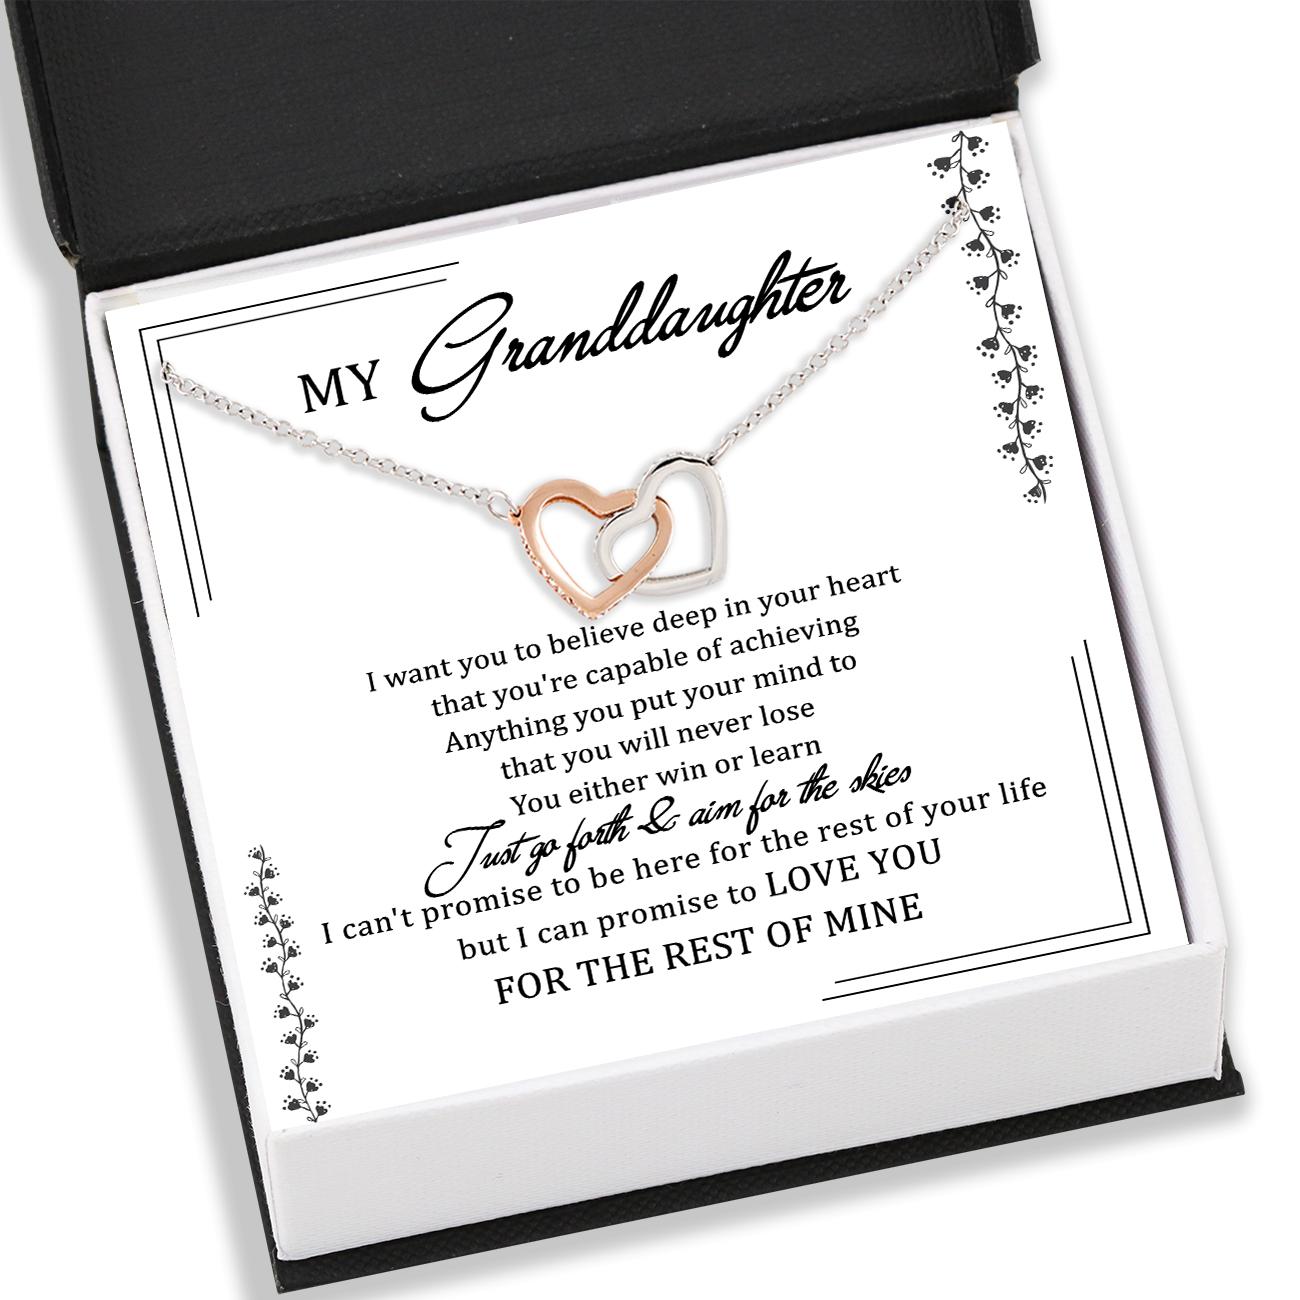 Granddaughter Necklace, Customize Name - To Granddaughter Necklace Box Card Message - Jewelry For Granddaughter For Her